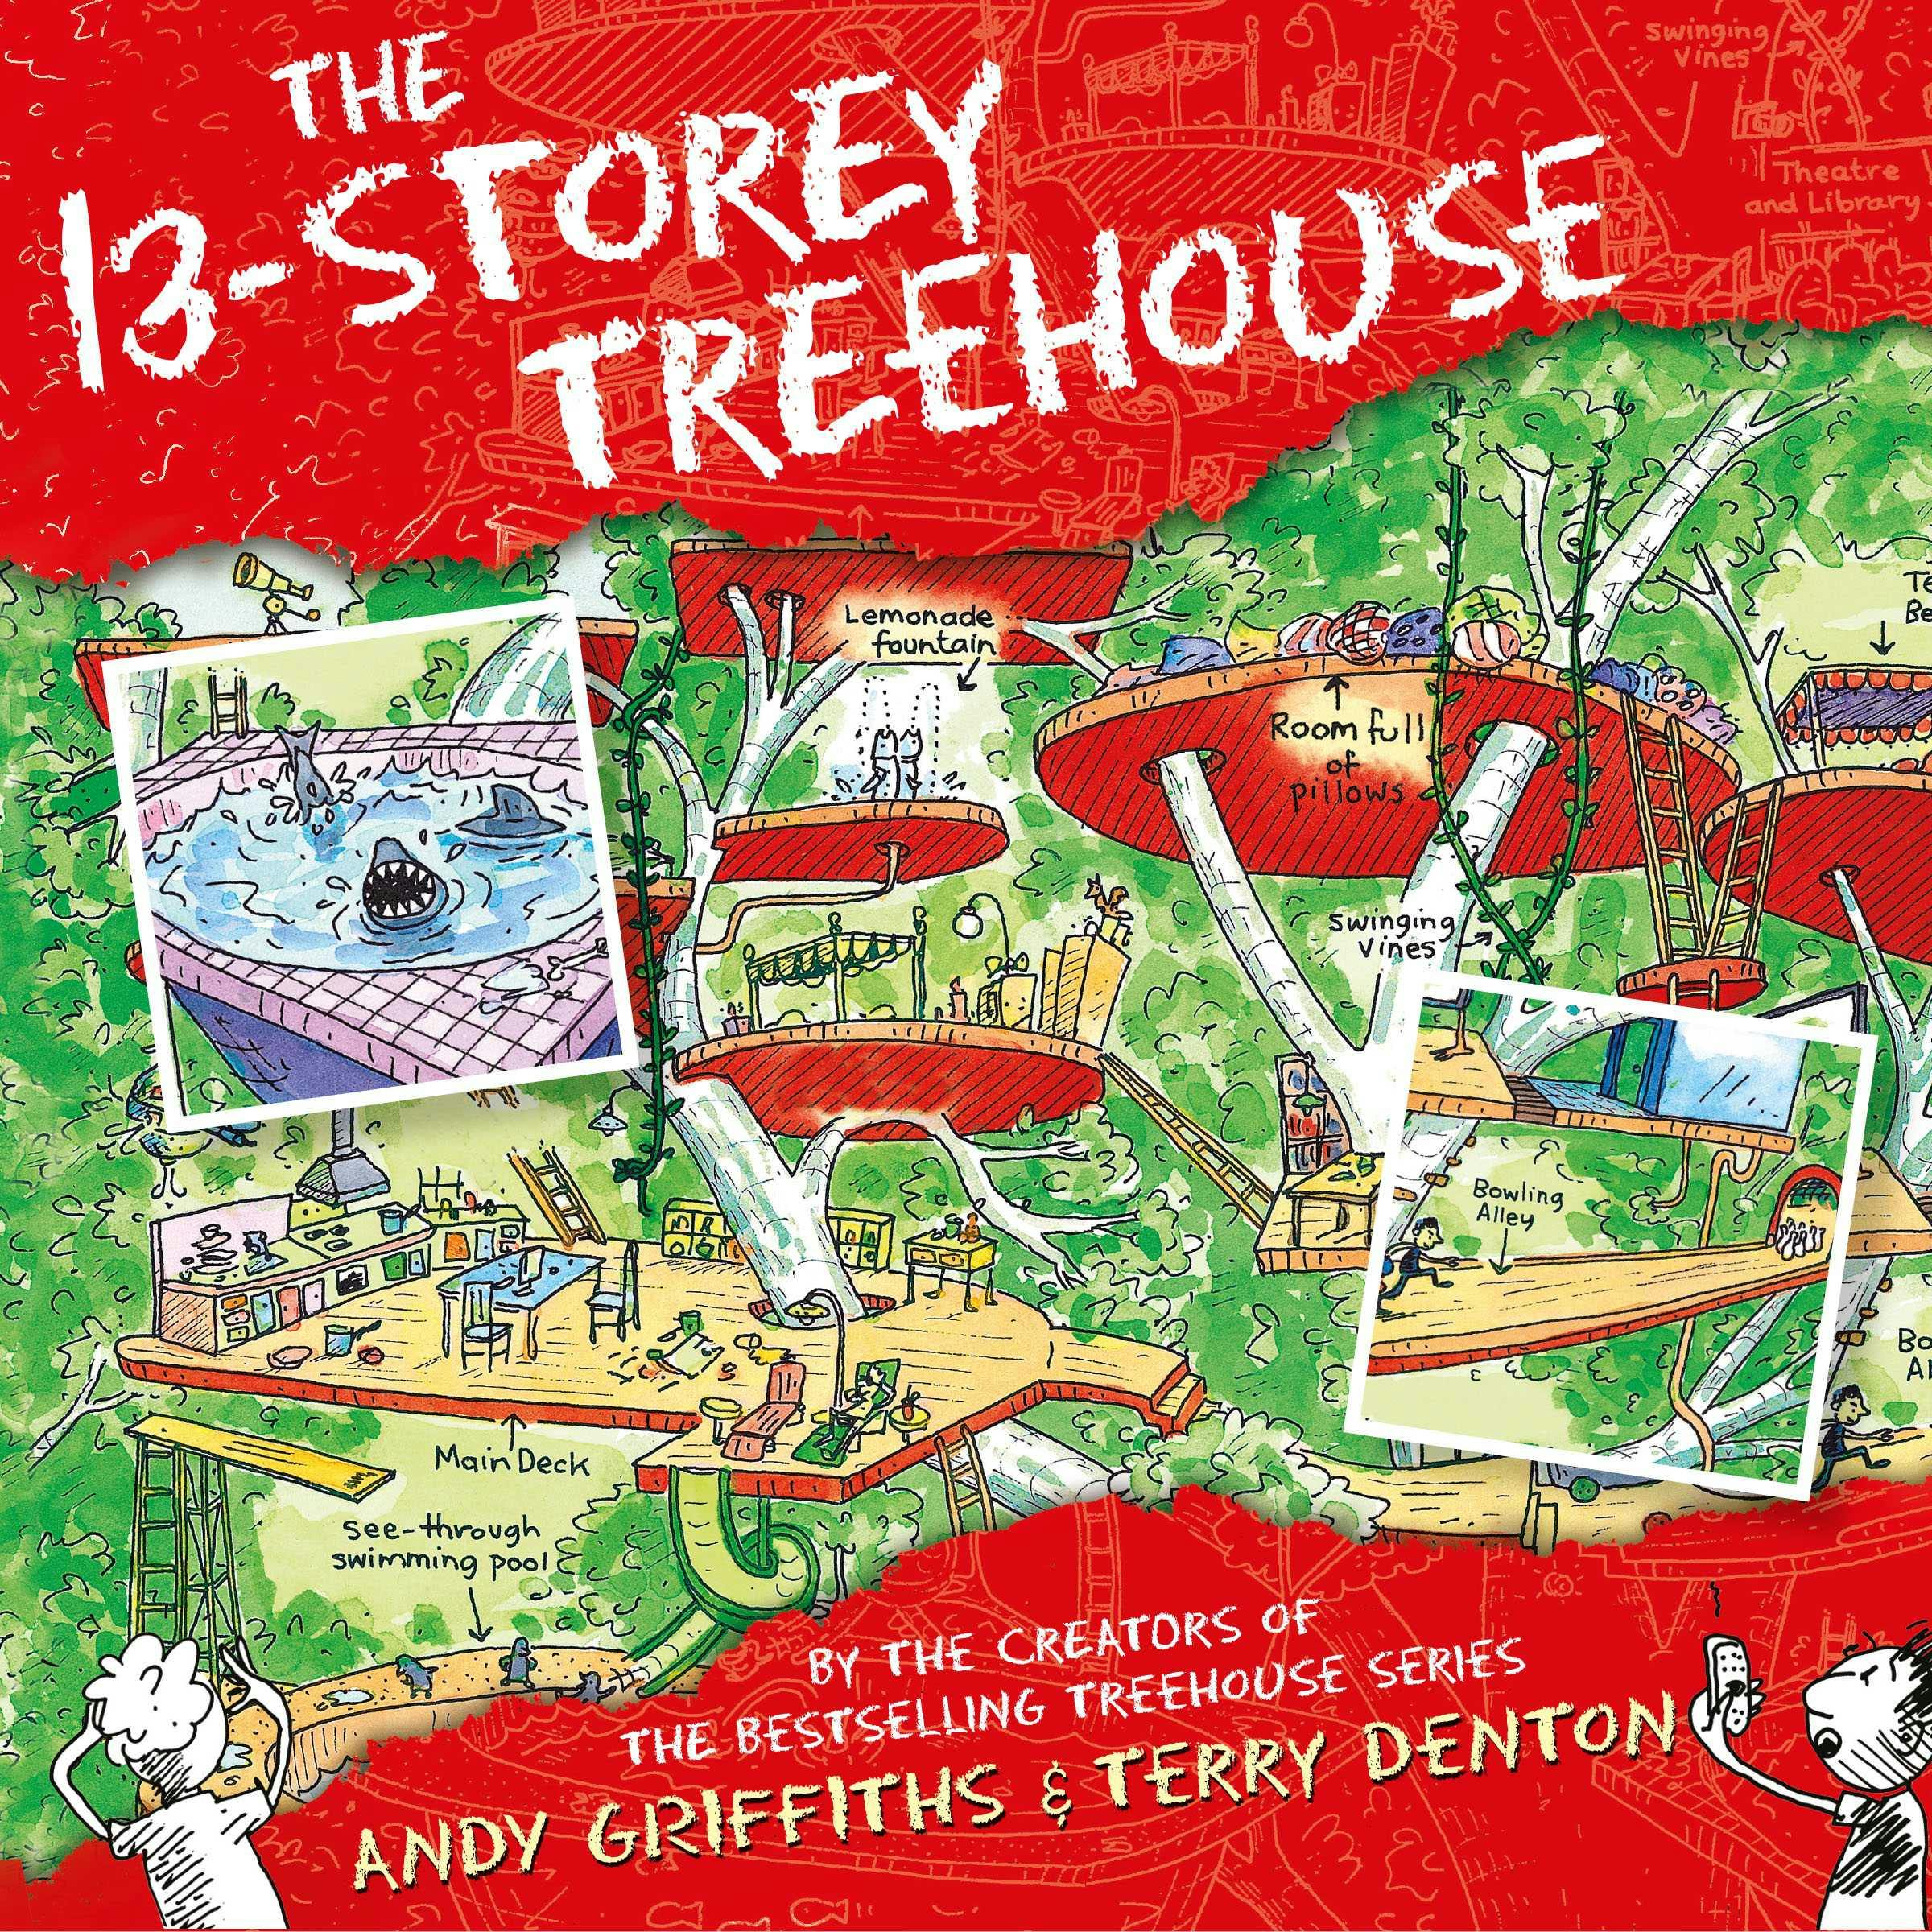 The 13-Storey Treehouse - Andy Griffiths